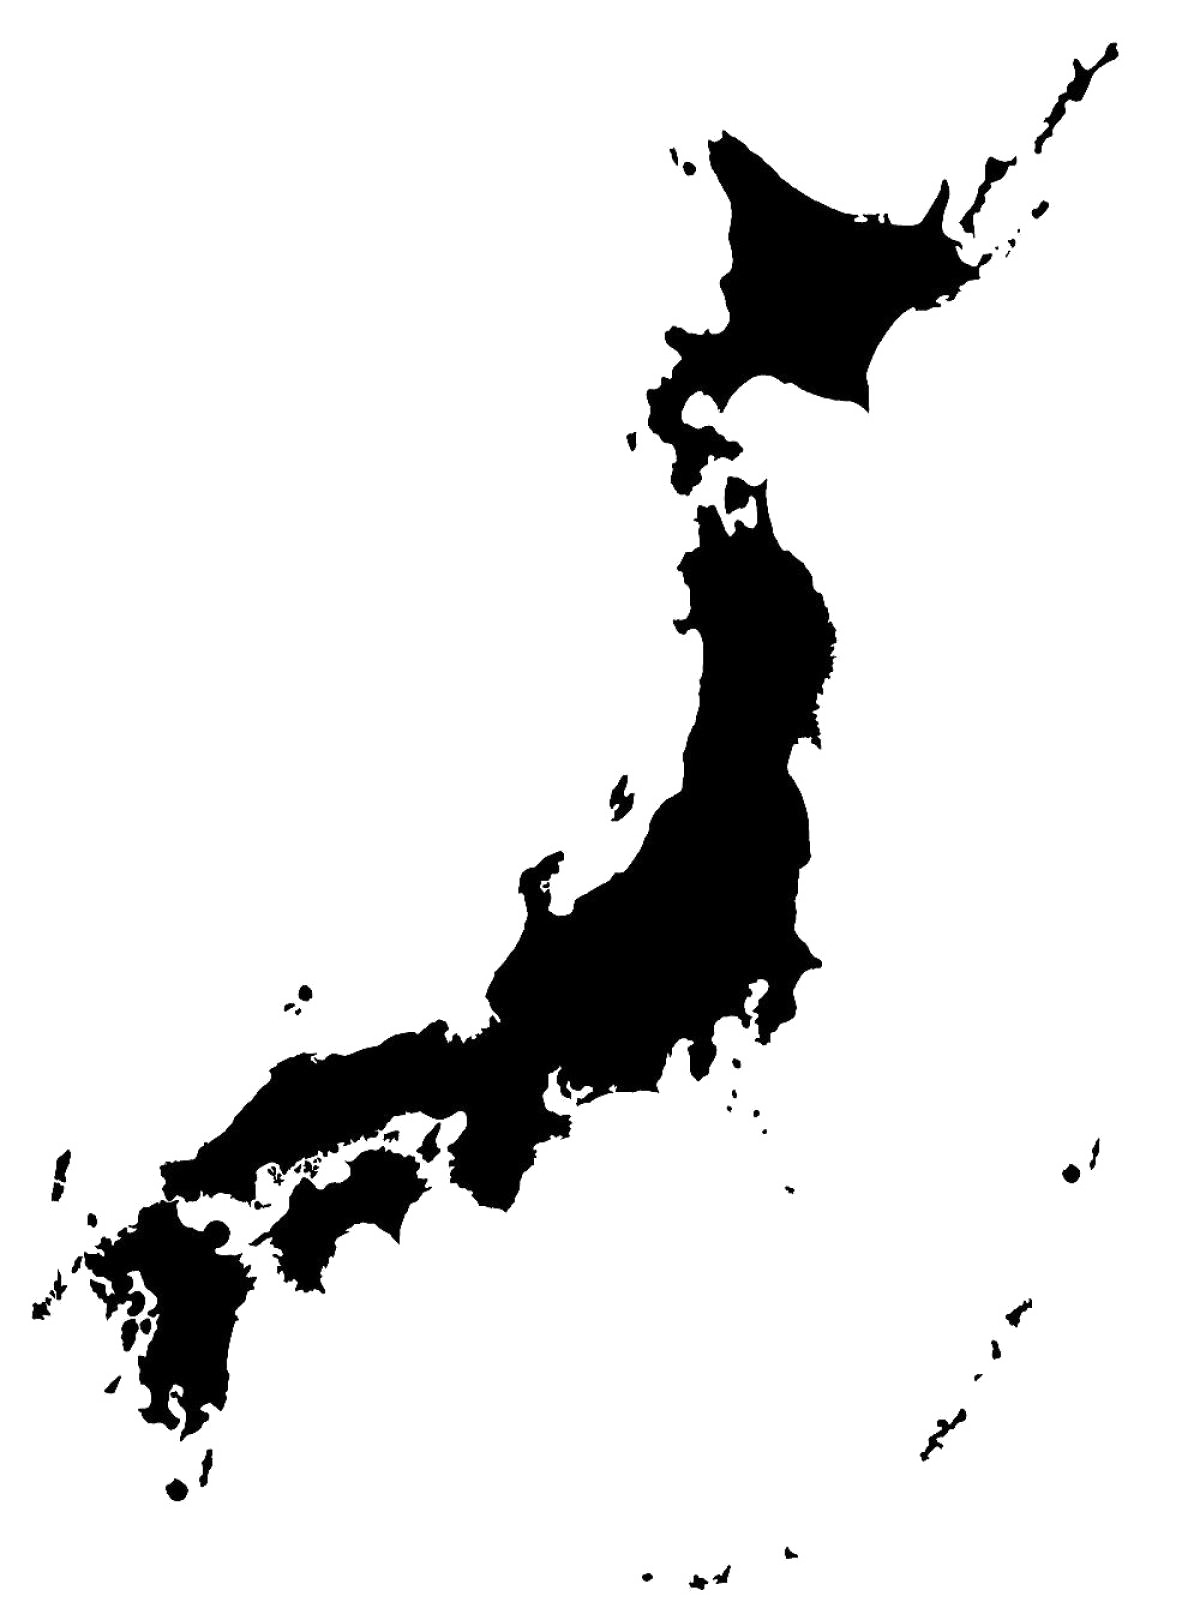 Japan Map Image Free Clipart HD PNG Image